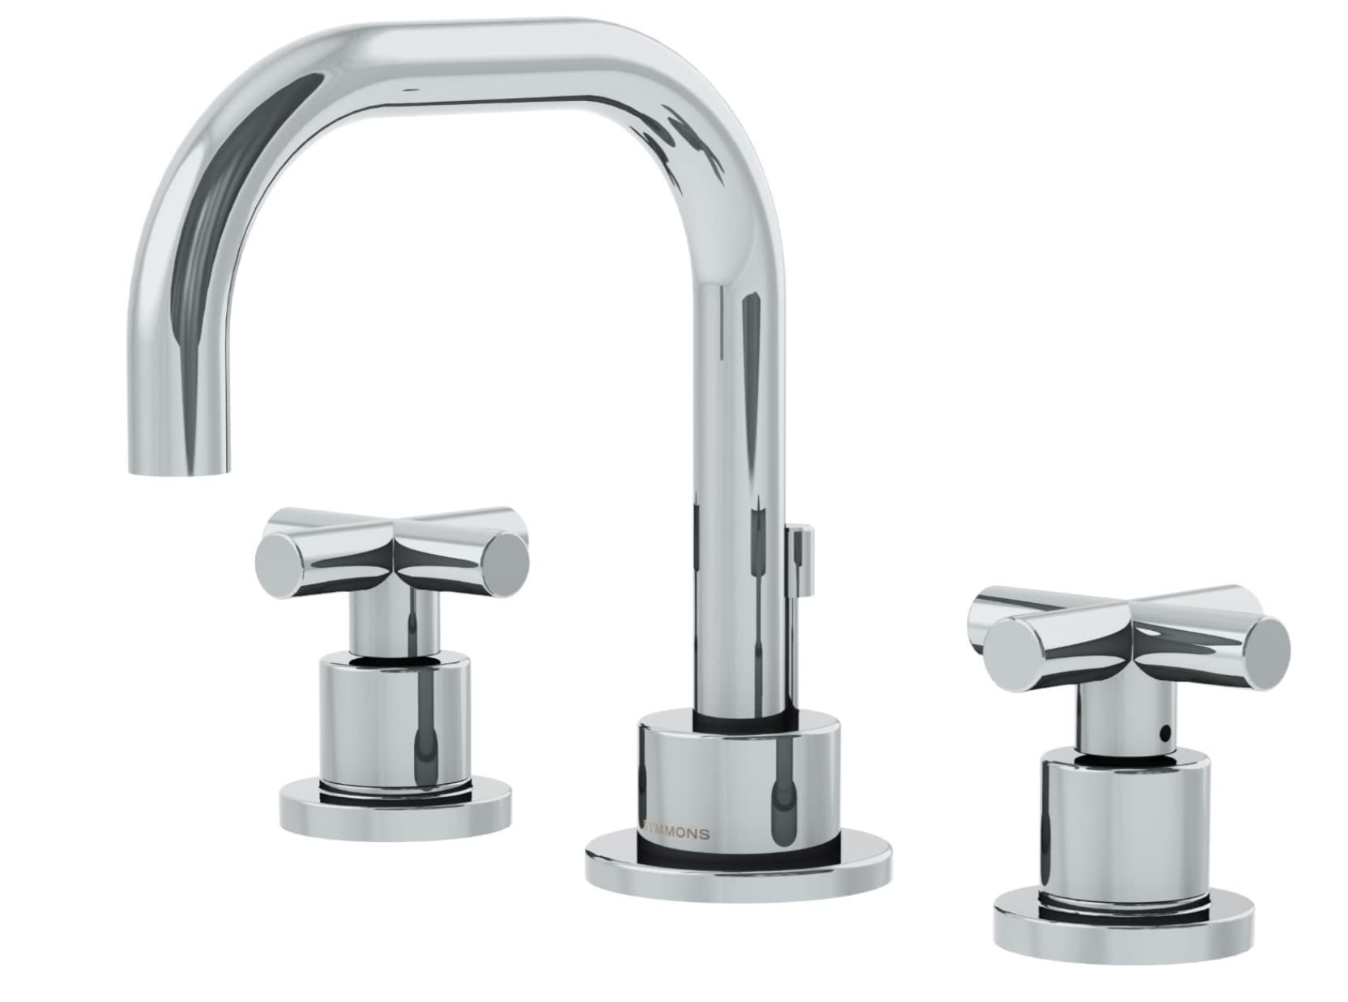 Symmons SLW-3512-H3 Widespread 2-Handle Bathroom Faucet Review